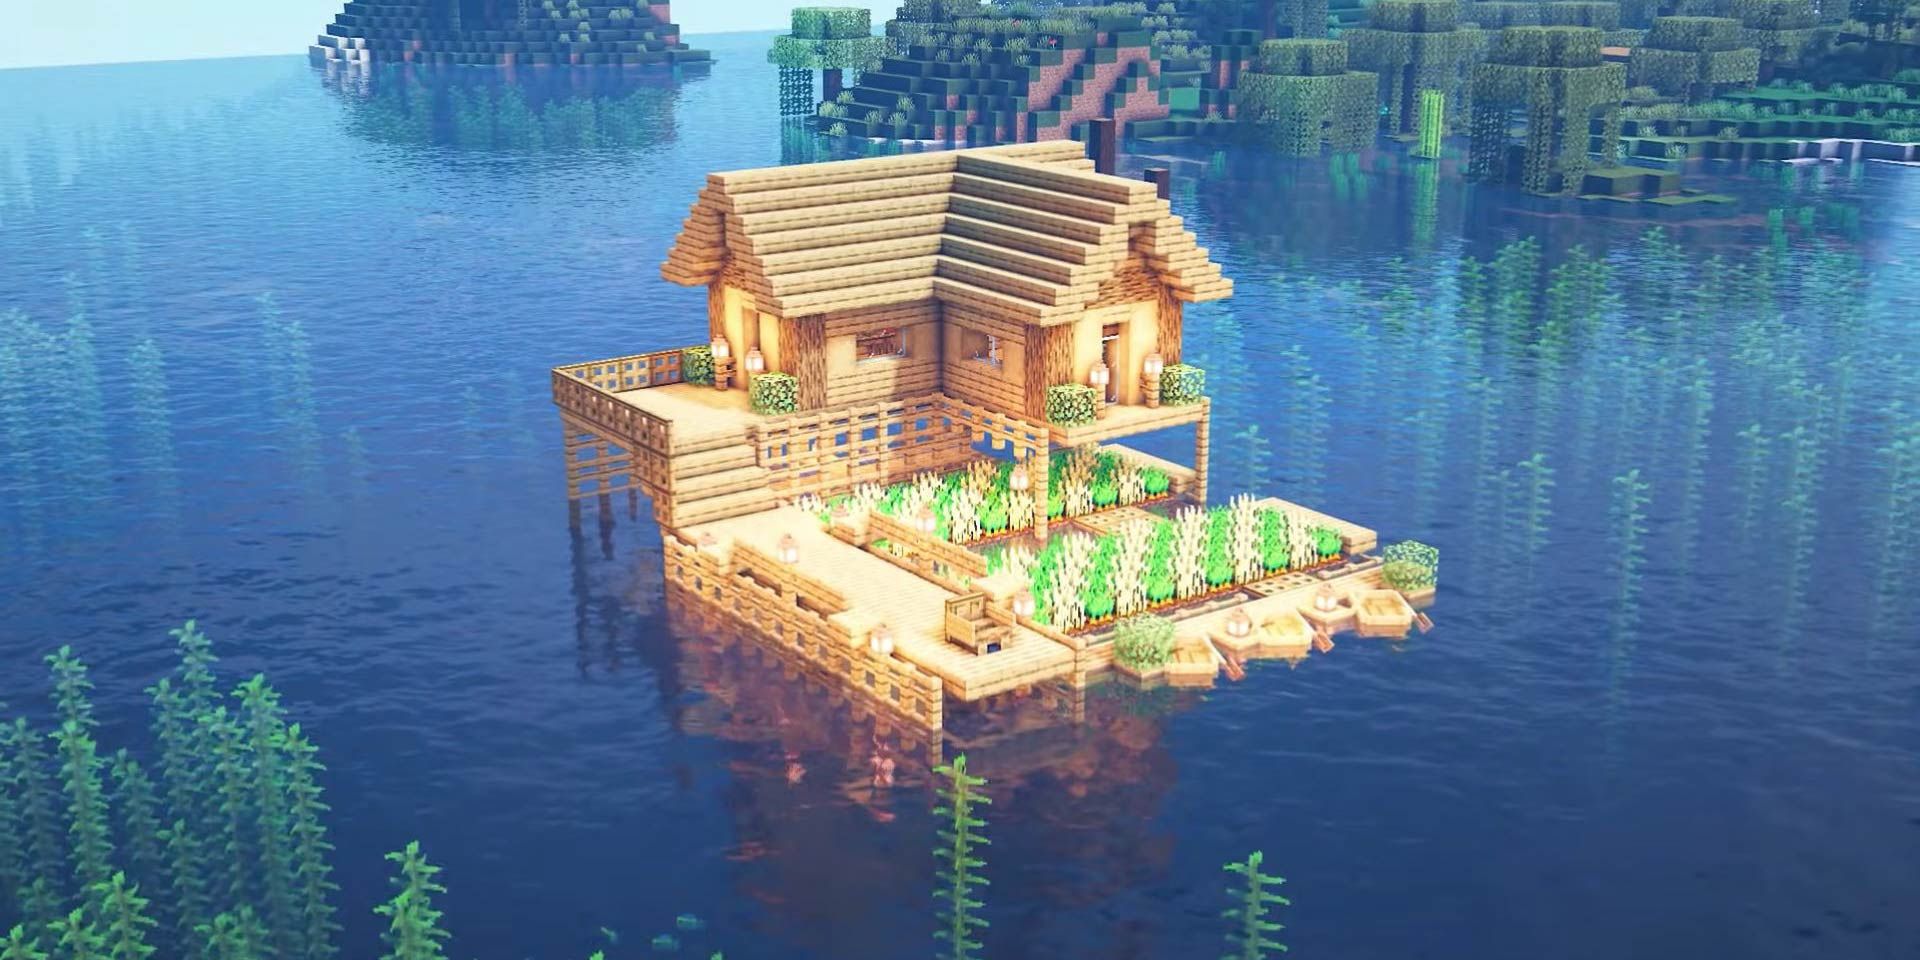 A stilt house in the middle of a lake in Minecraft.